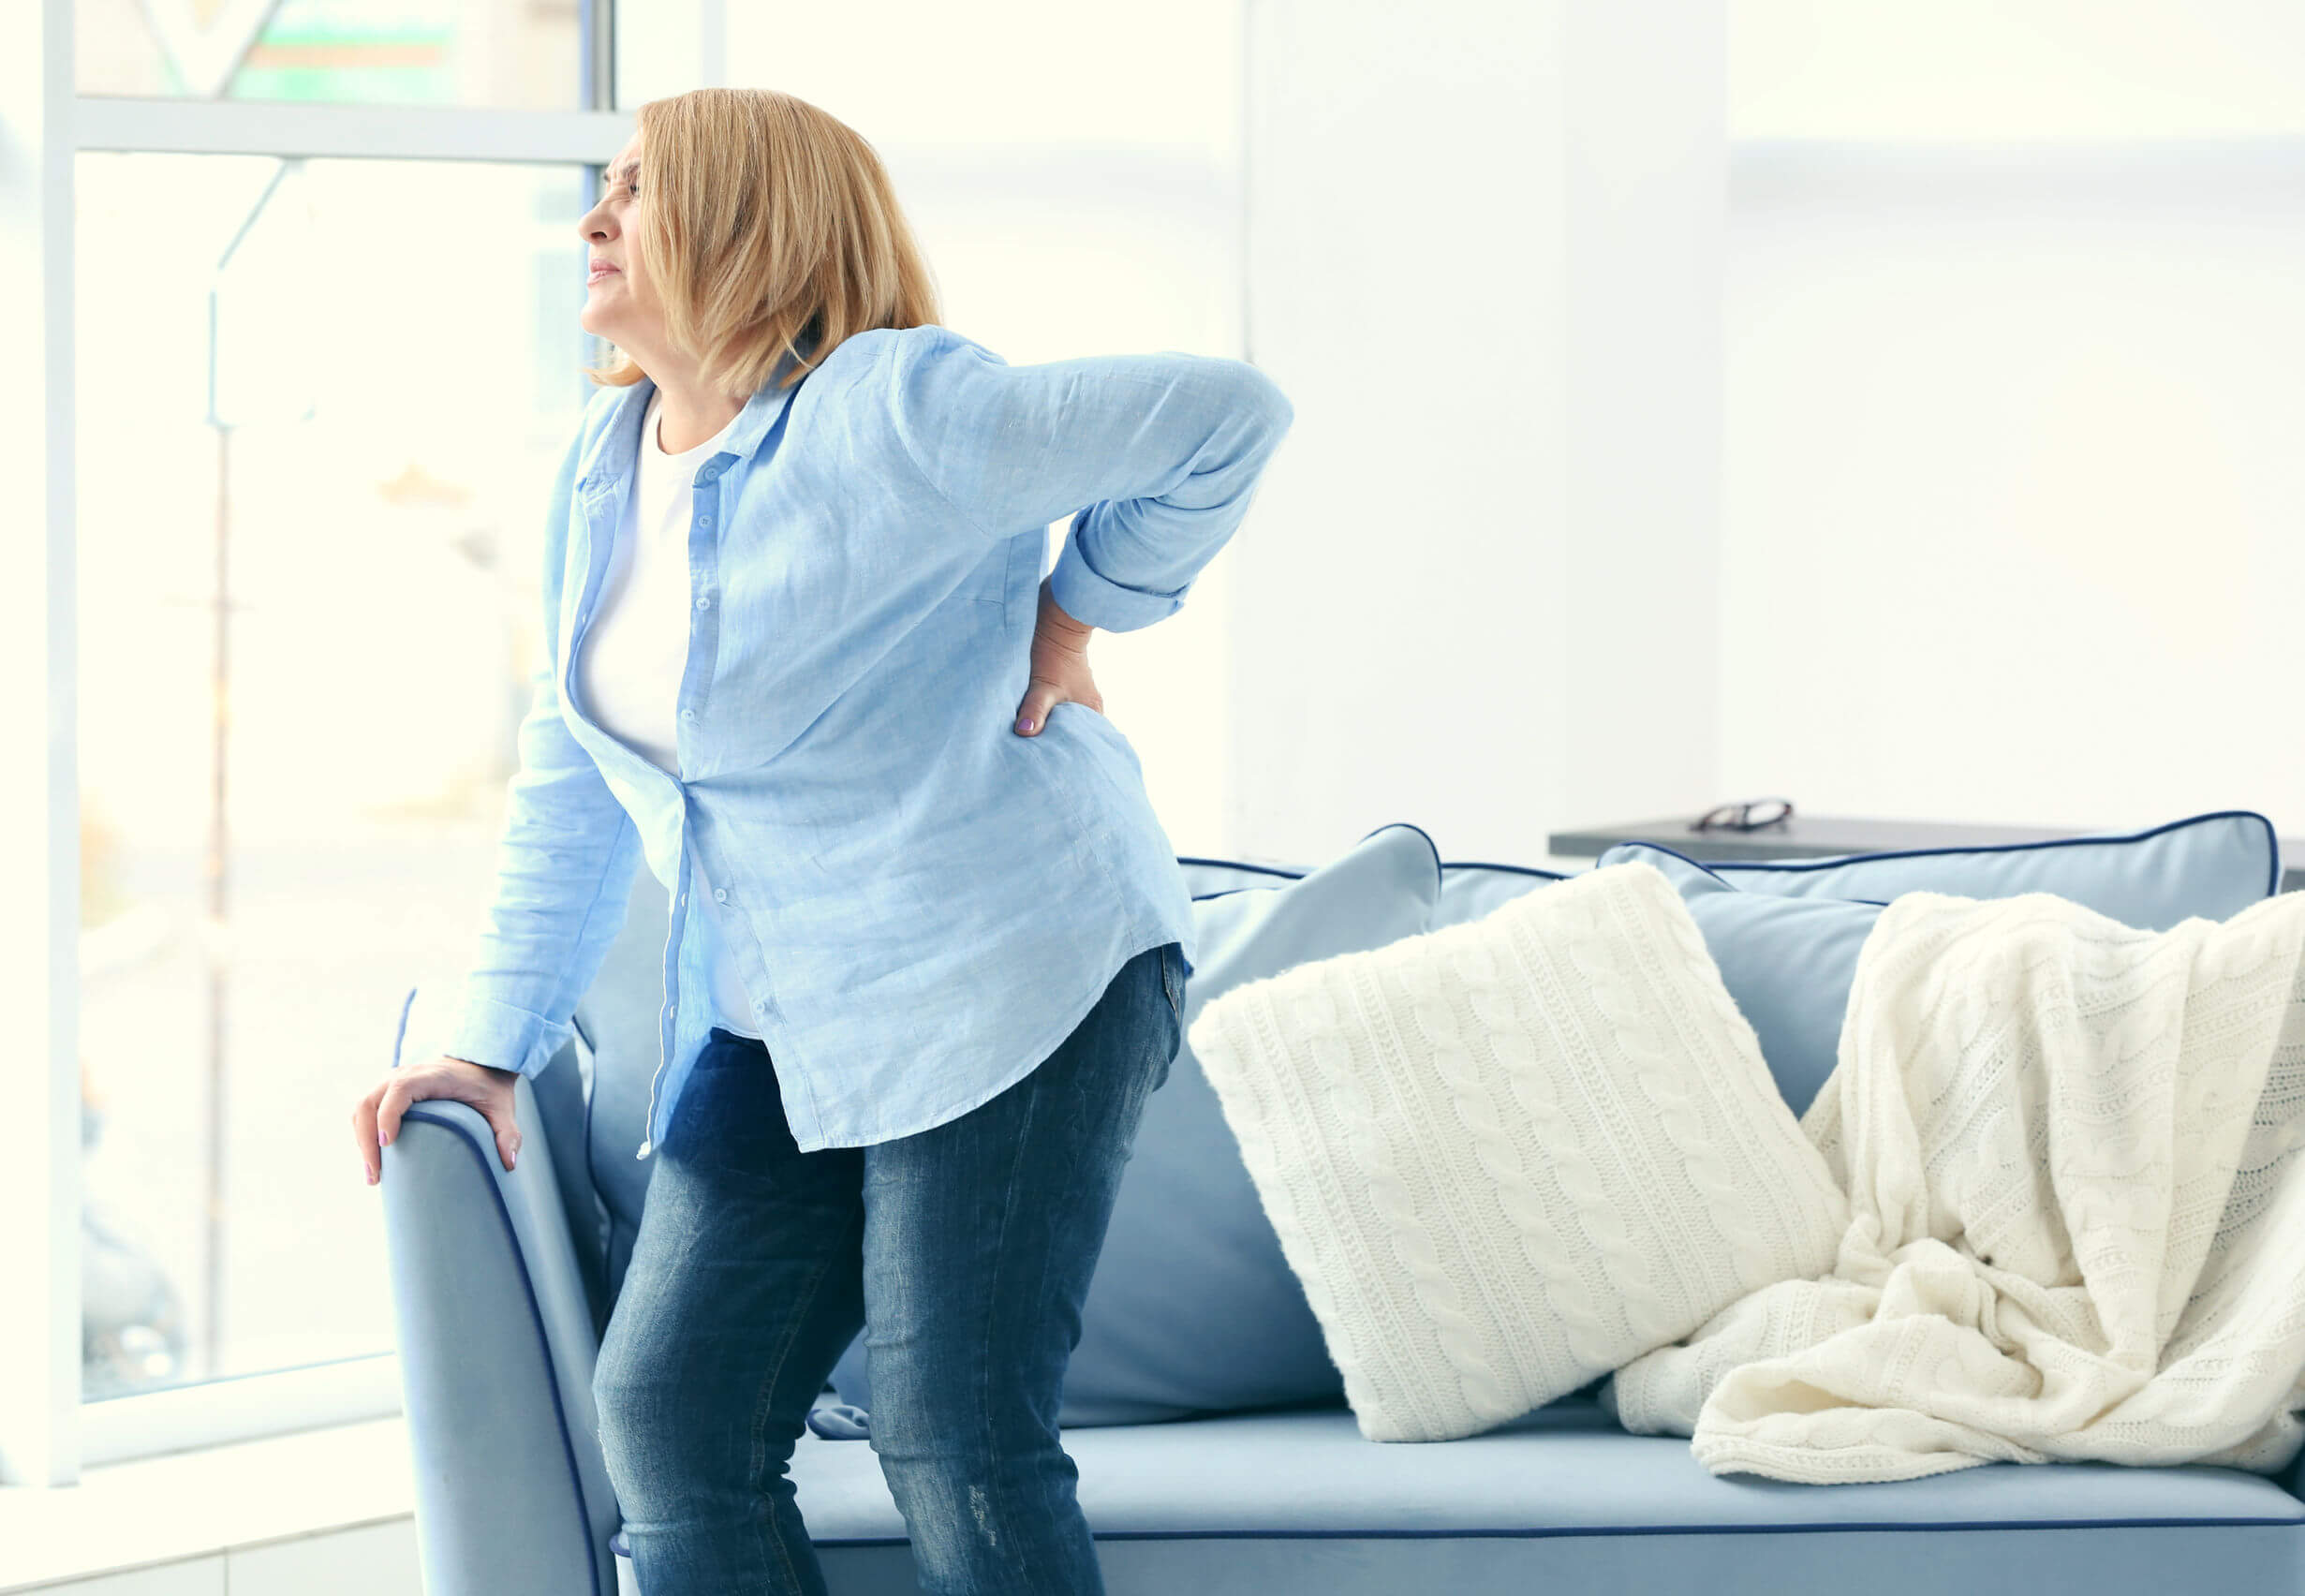 The most common bone diseases include low back pain.